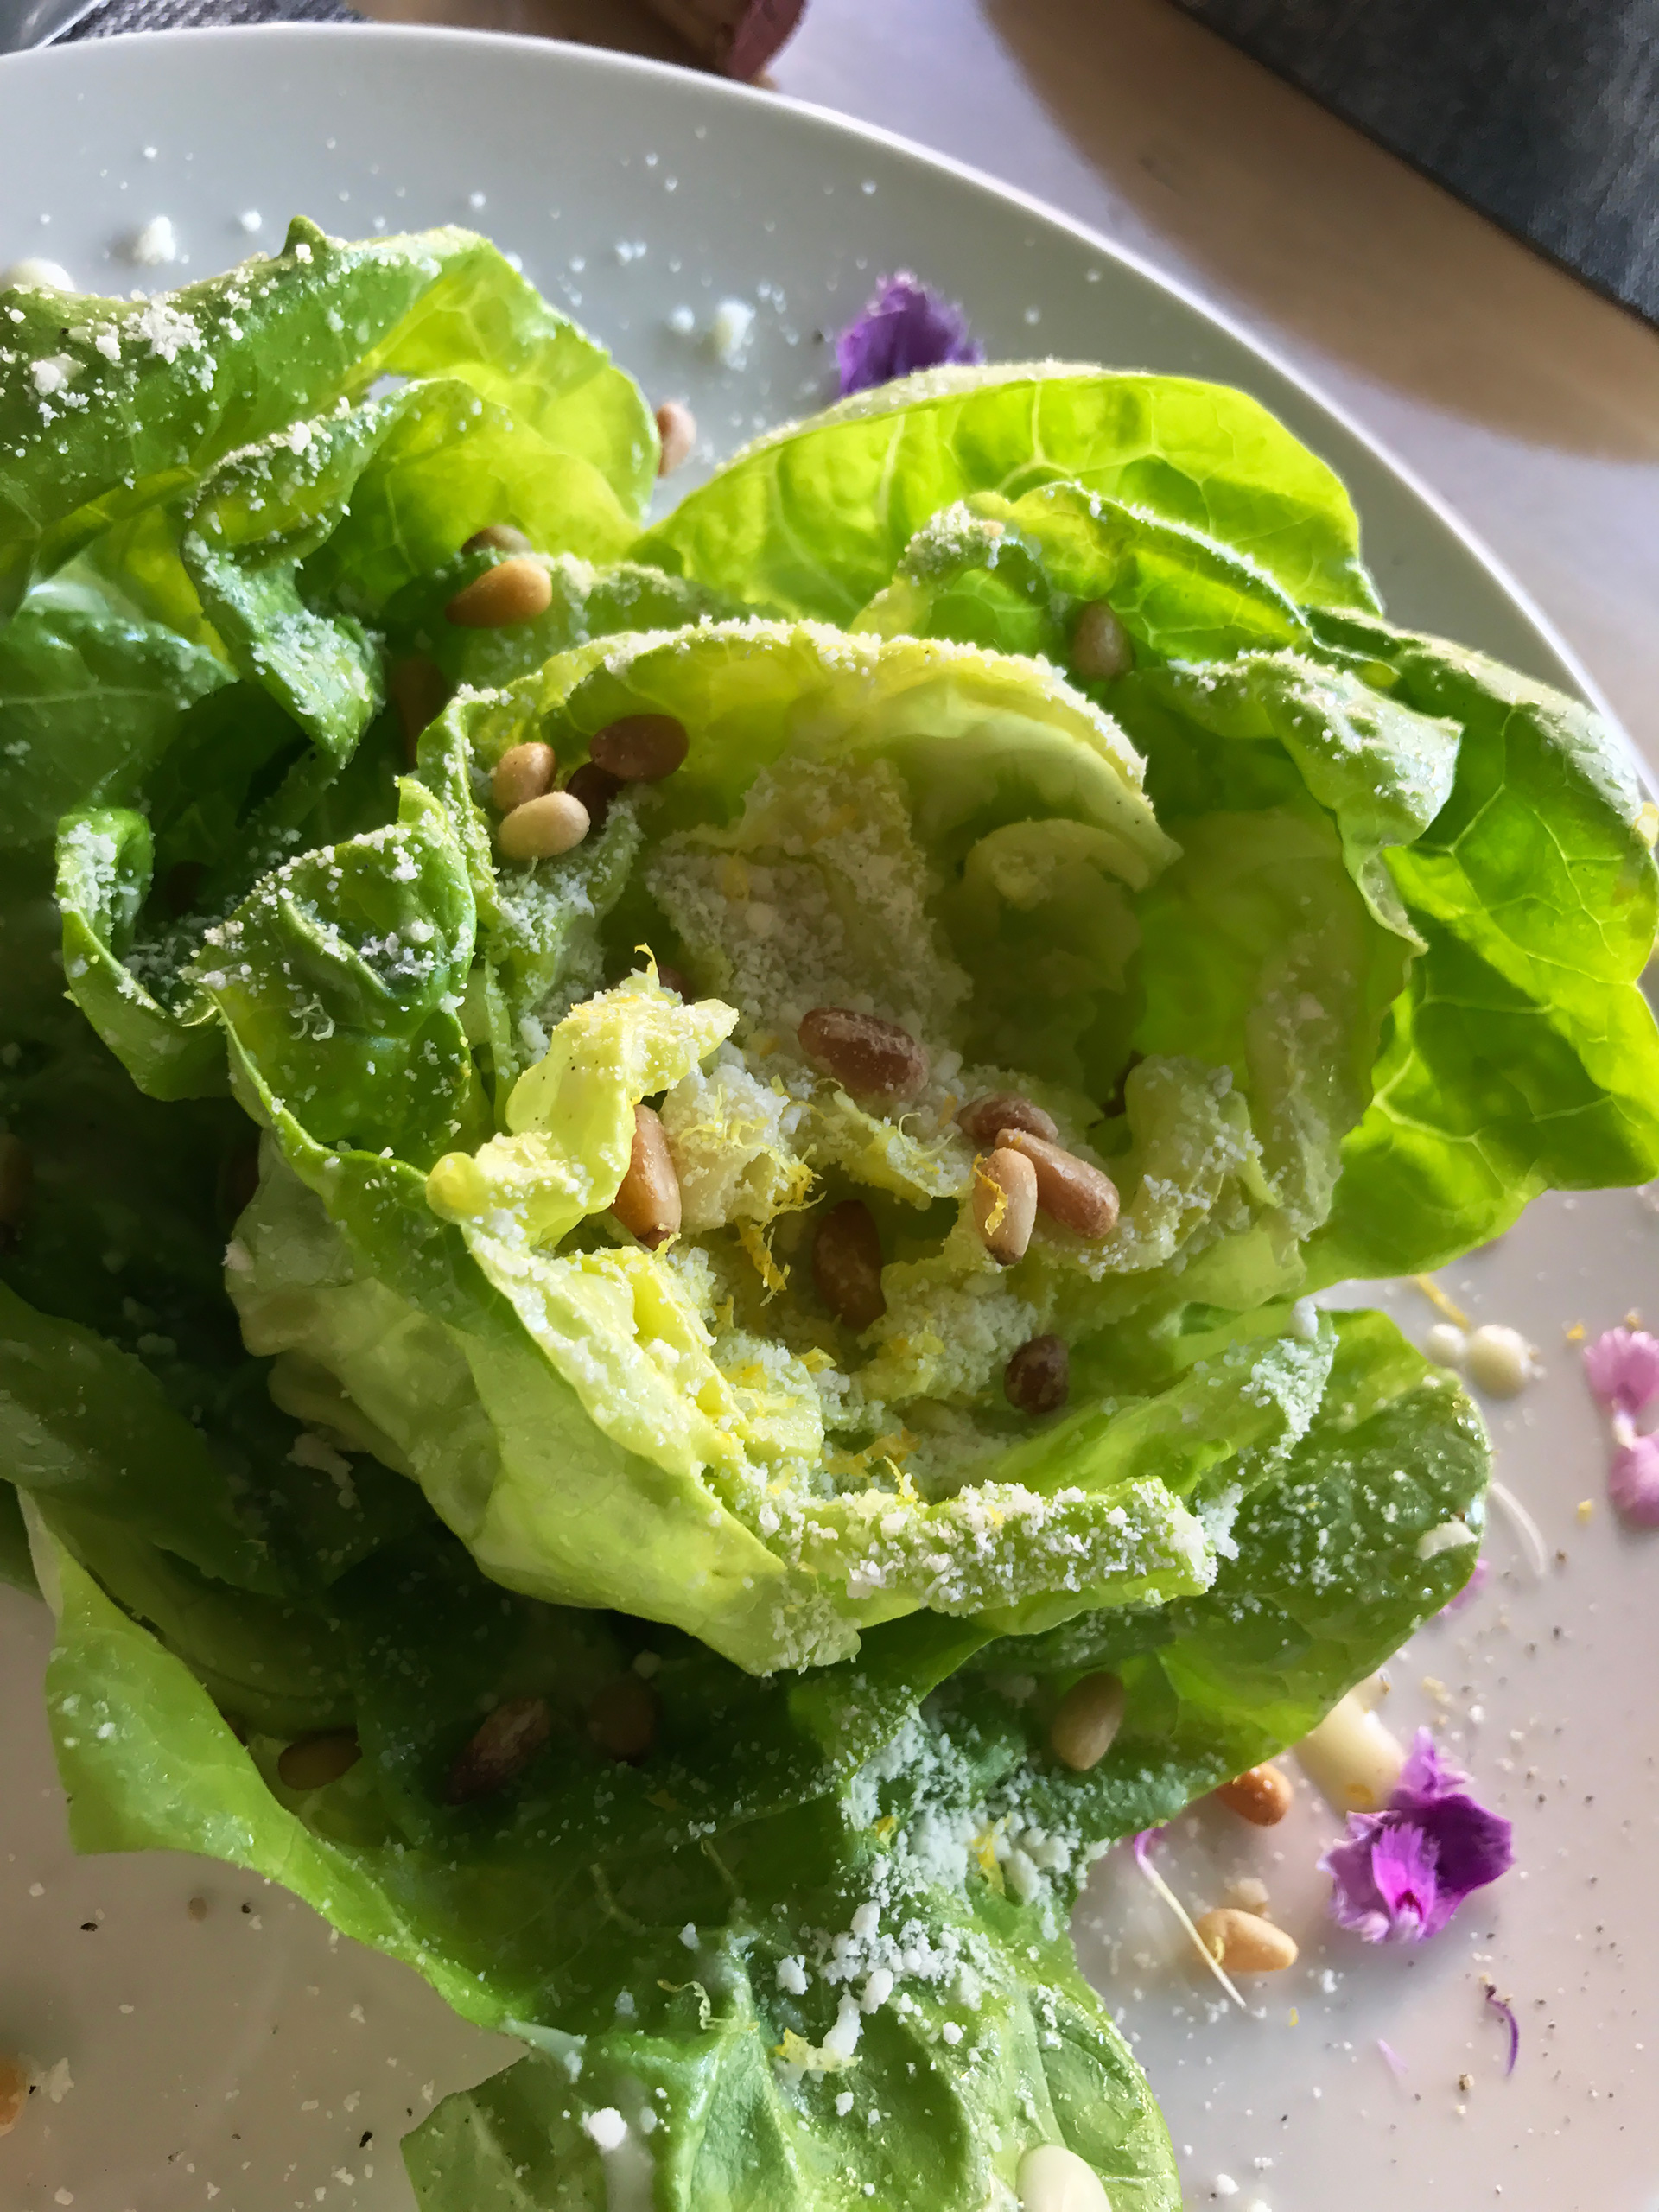 Butter lettuce salad with lemon dressing, grated Grana Padano cheese and roasted pine nuts.